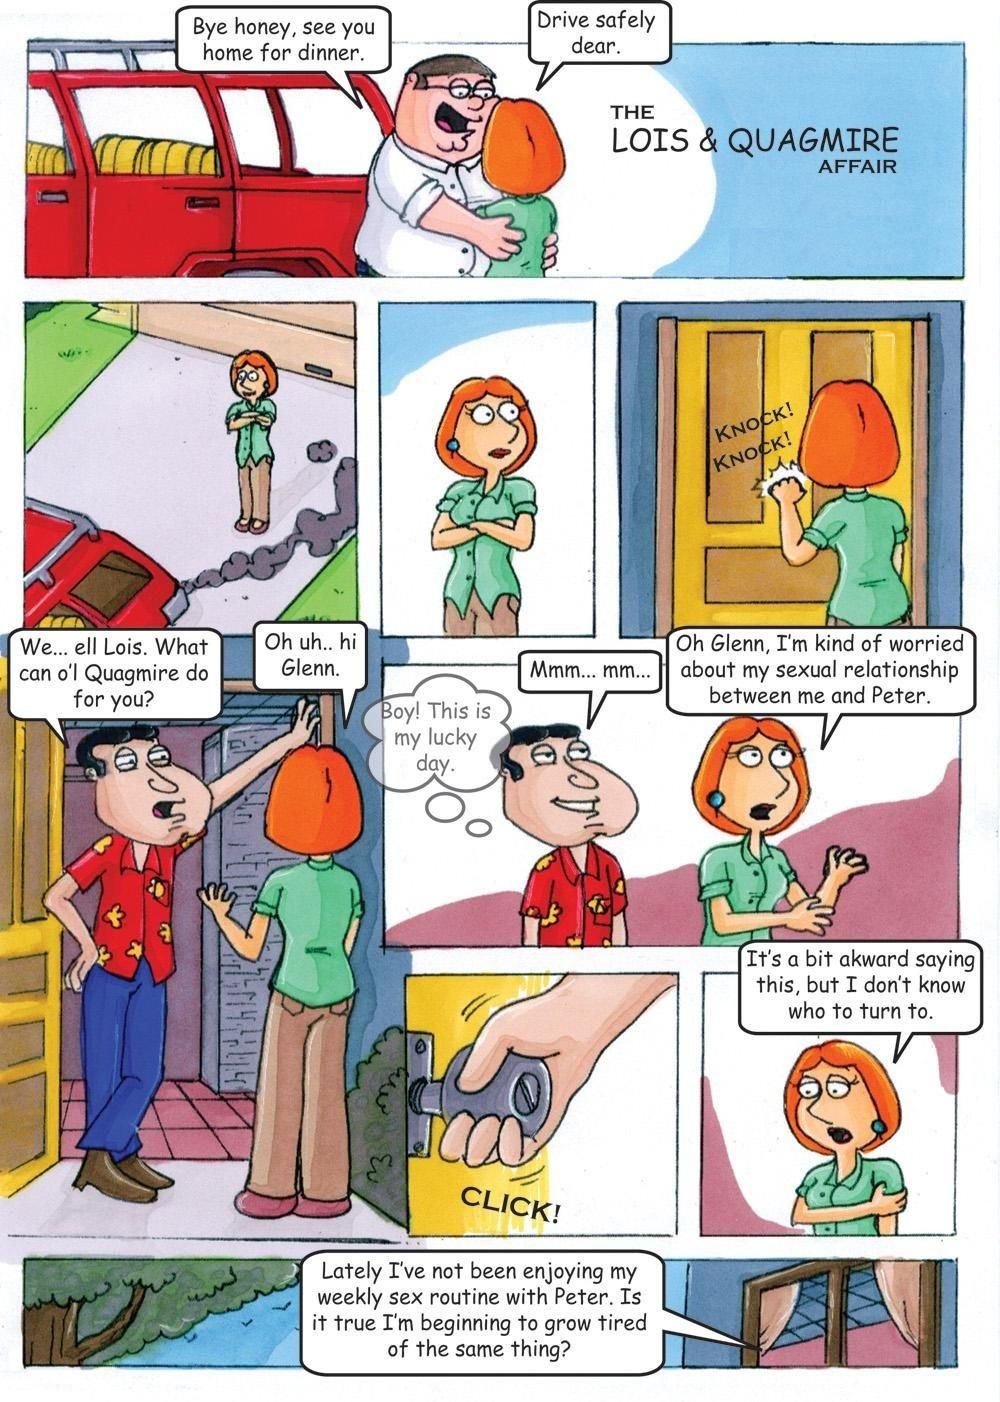 Lois and Quagmire Affair (Family Guy) page 1